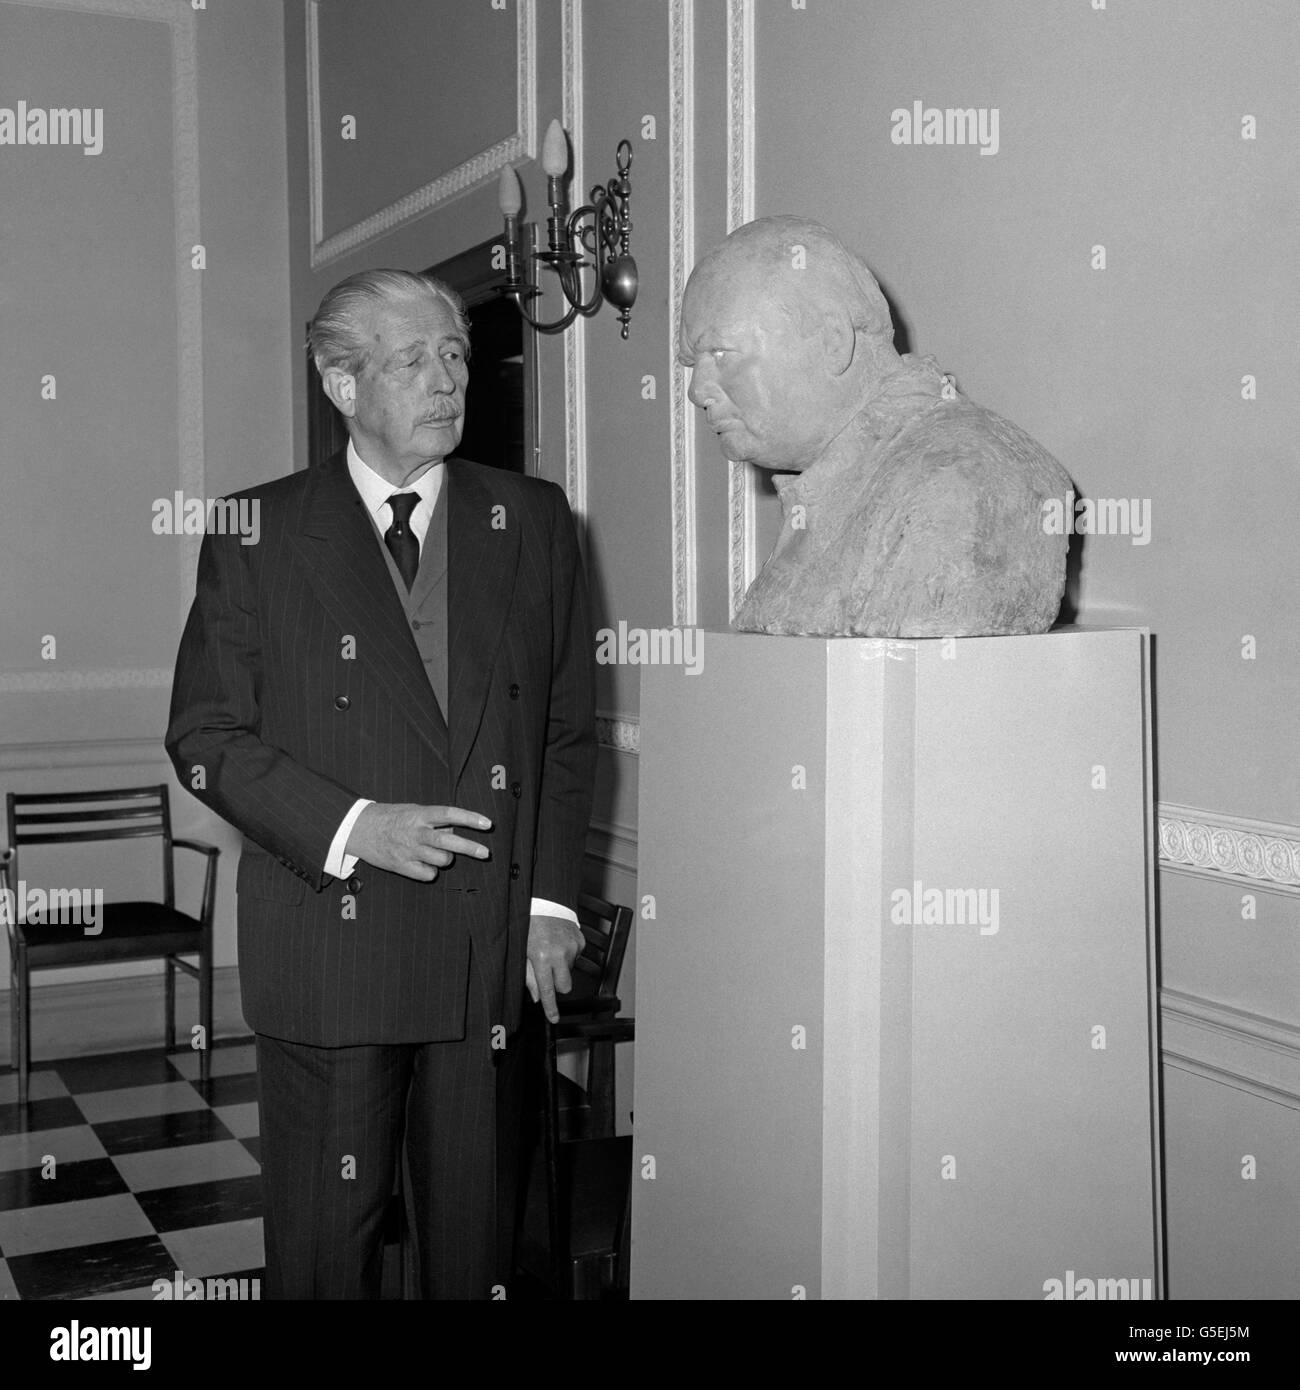 Former Prime Minister Harold Macmillan, who served as a minister under Sir Winston Churchill in war and peace, admires a bust Sir Winston which had been unveiled by Lady Spencer-Churchill (not pictured) as the Conservative Party Central Office in Smith Square, London. The bust, the work of Oscar Nemon, was commissioned by the Conservative Party as their memorial to Sir Winston. Stock Photo